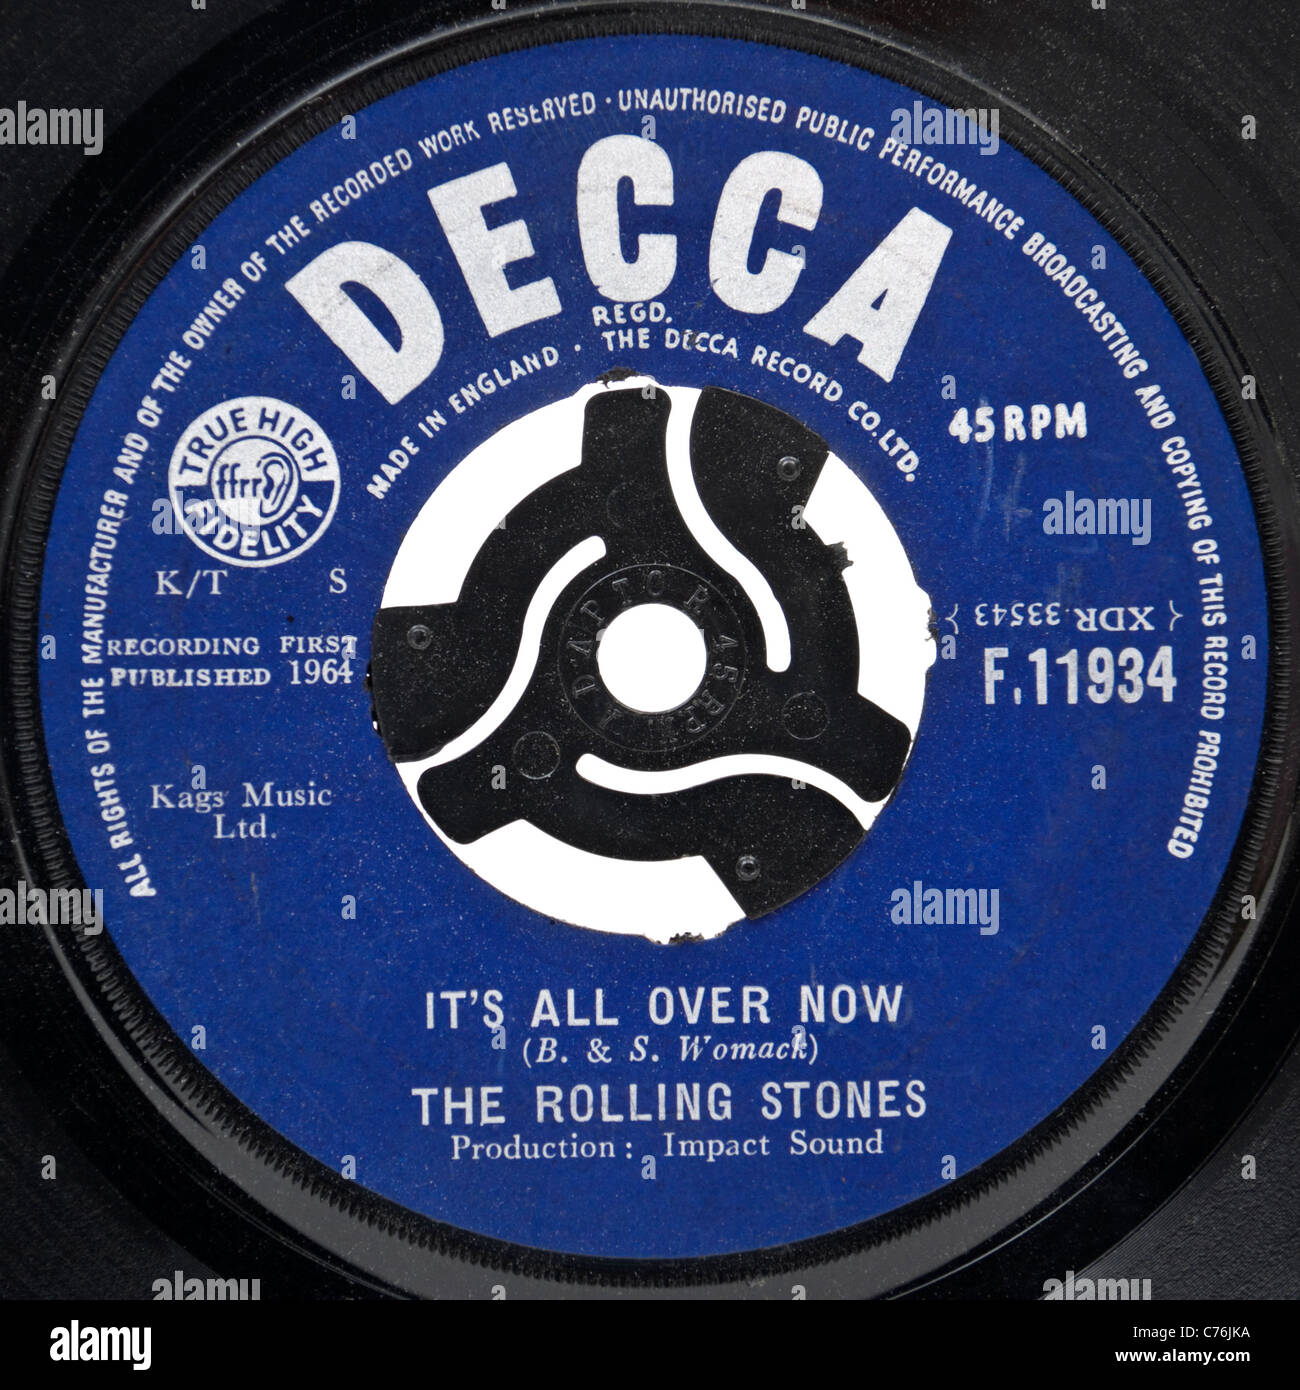 The Rolling Stones – It's All Over Now Decca-45-GD 5060 Greece 1964